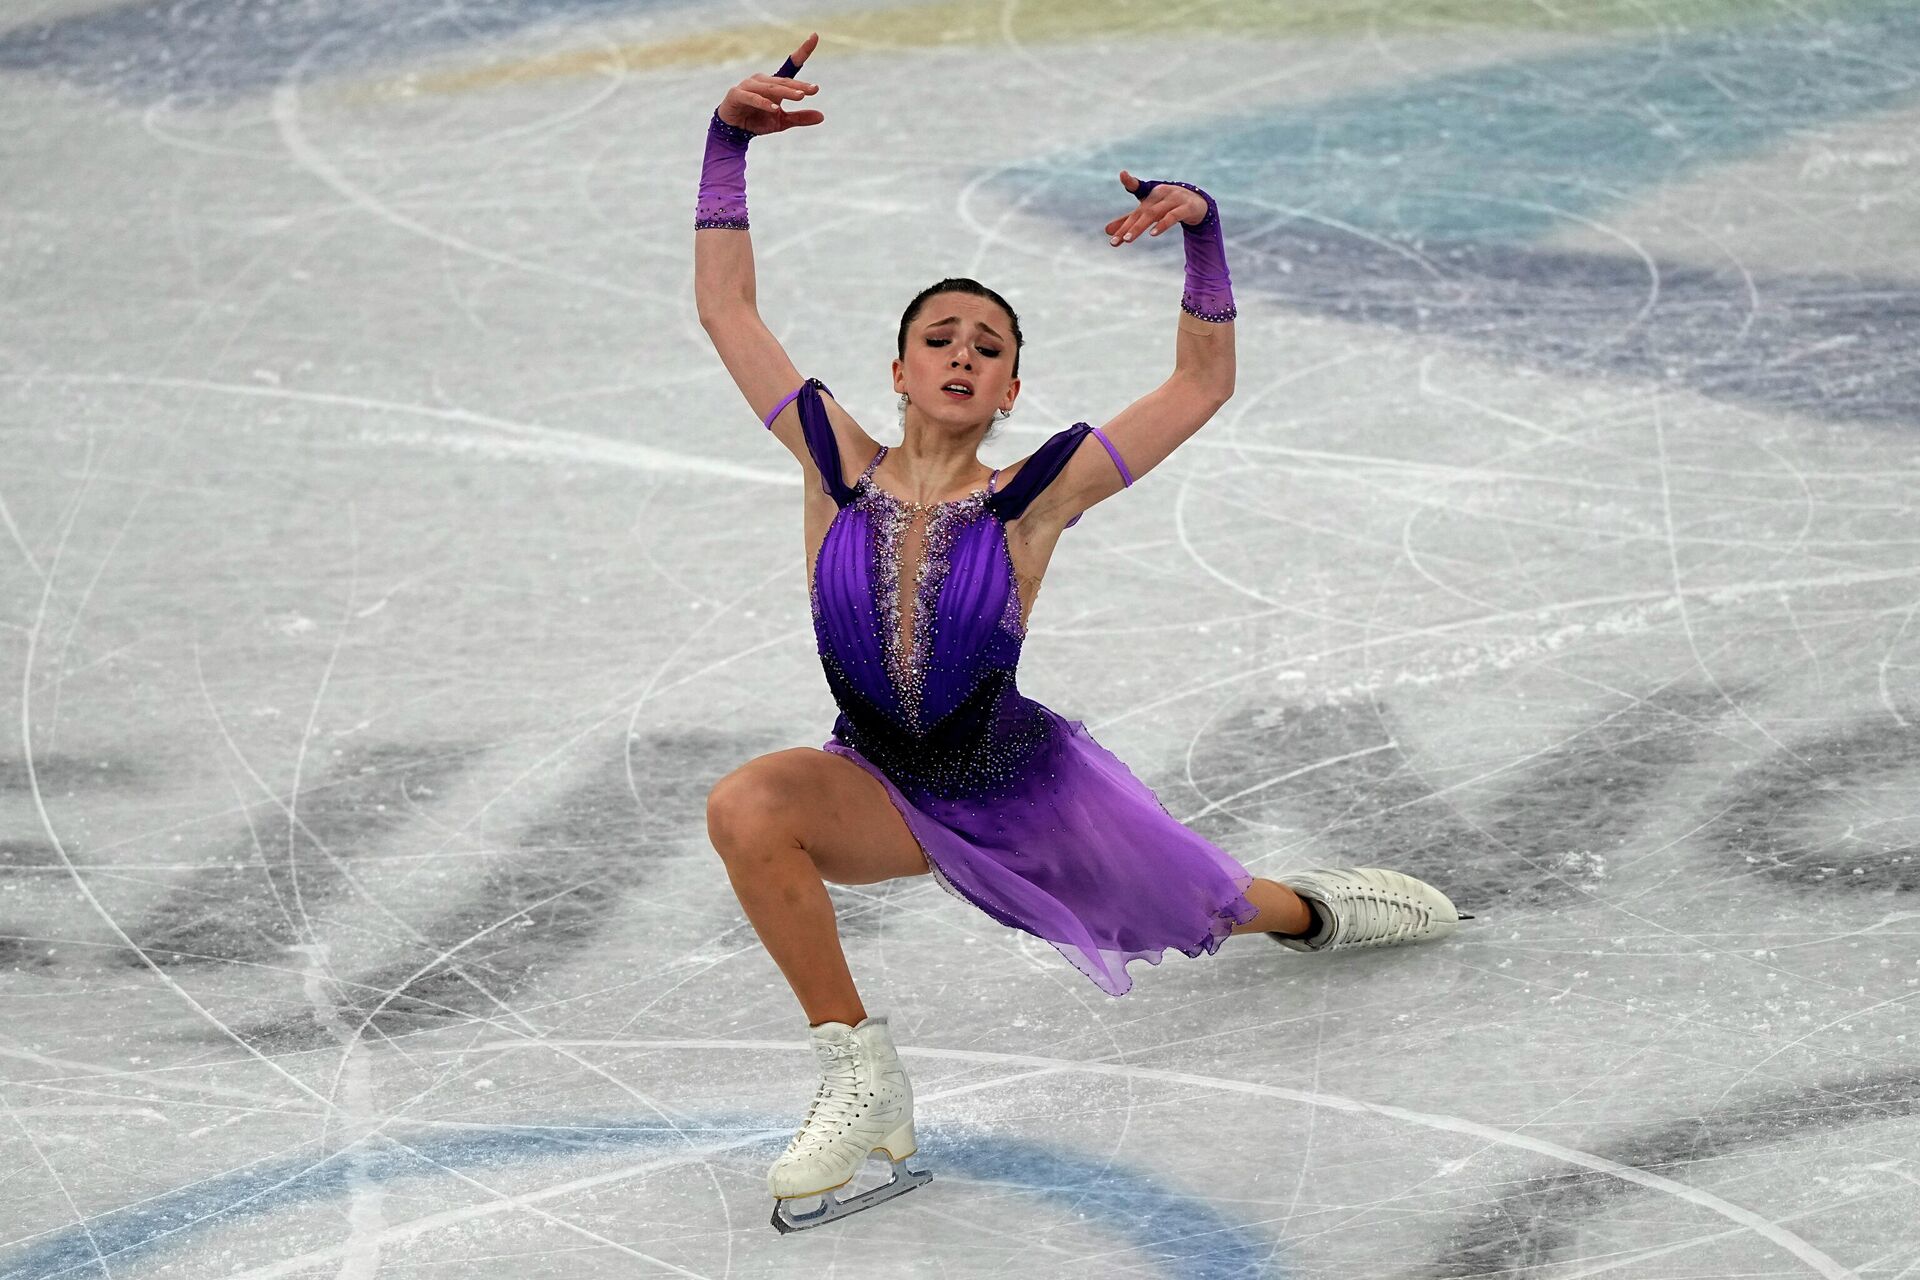 Kamila Valieva, of the Russian Olympic Committee, competes in the women's short program team figure skating competition at the 2022 Winter Olympics, Sunday, Feb. 6, 2022, in Beijing. - Sputnik India, 1920, 30.12.2022